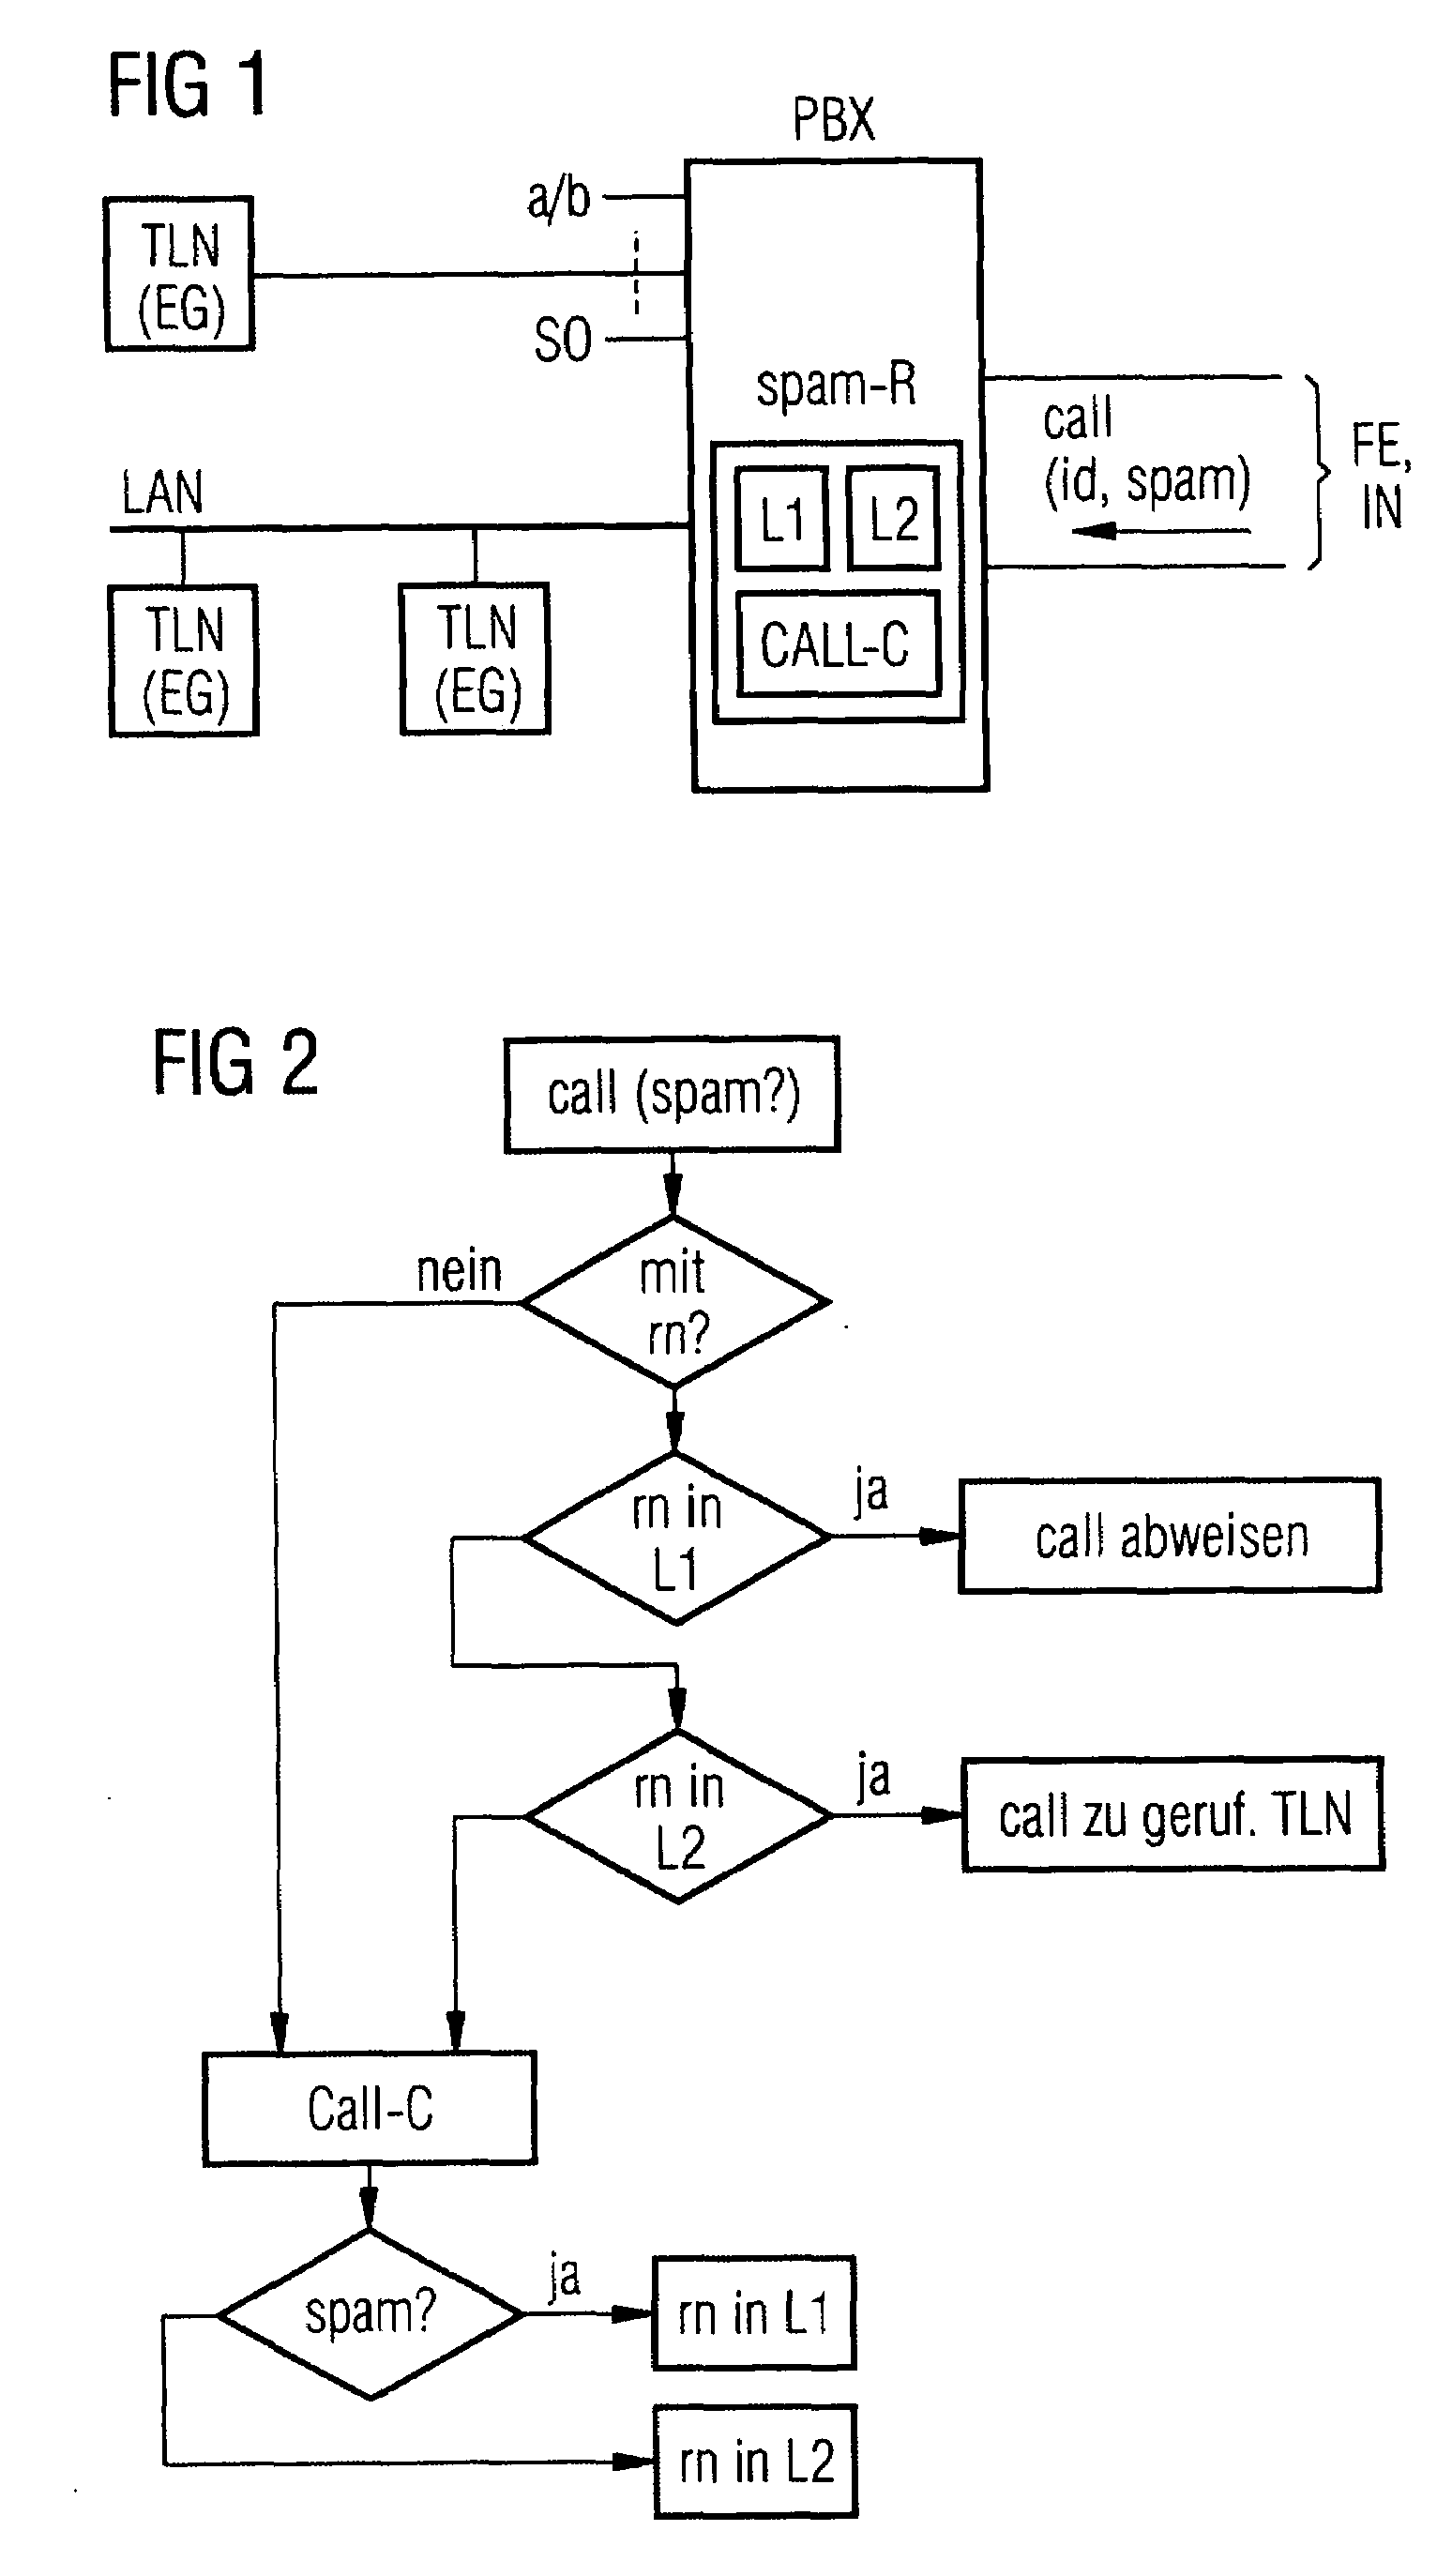 Method for Protecting Against Undesired Telephone Advertising in Communication Networks